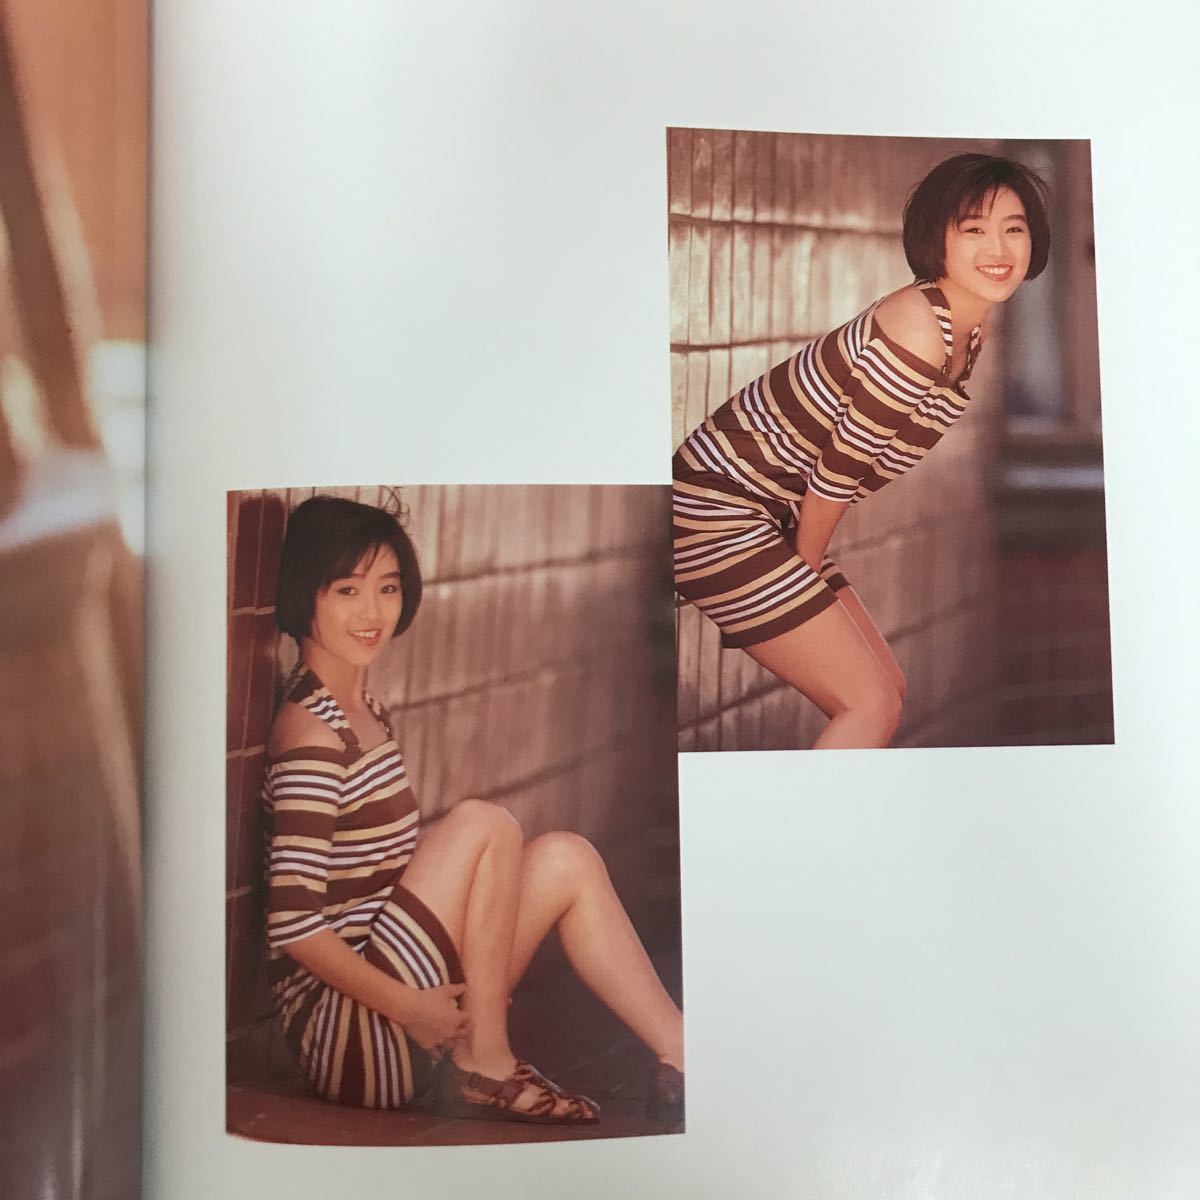 a-242*5/ Sakai Noriko / photoalbum / paste .-/1990 year 8 month 10 day the first version issue / photographing .no origin . two /